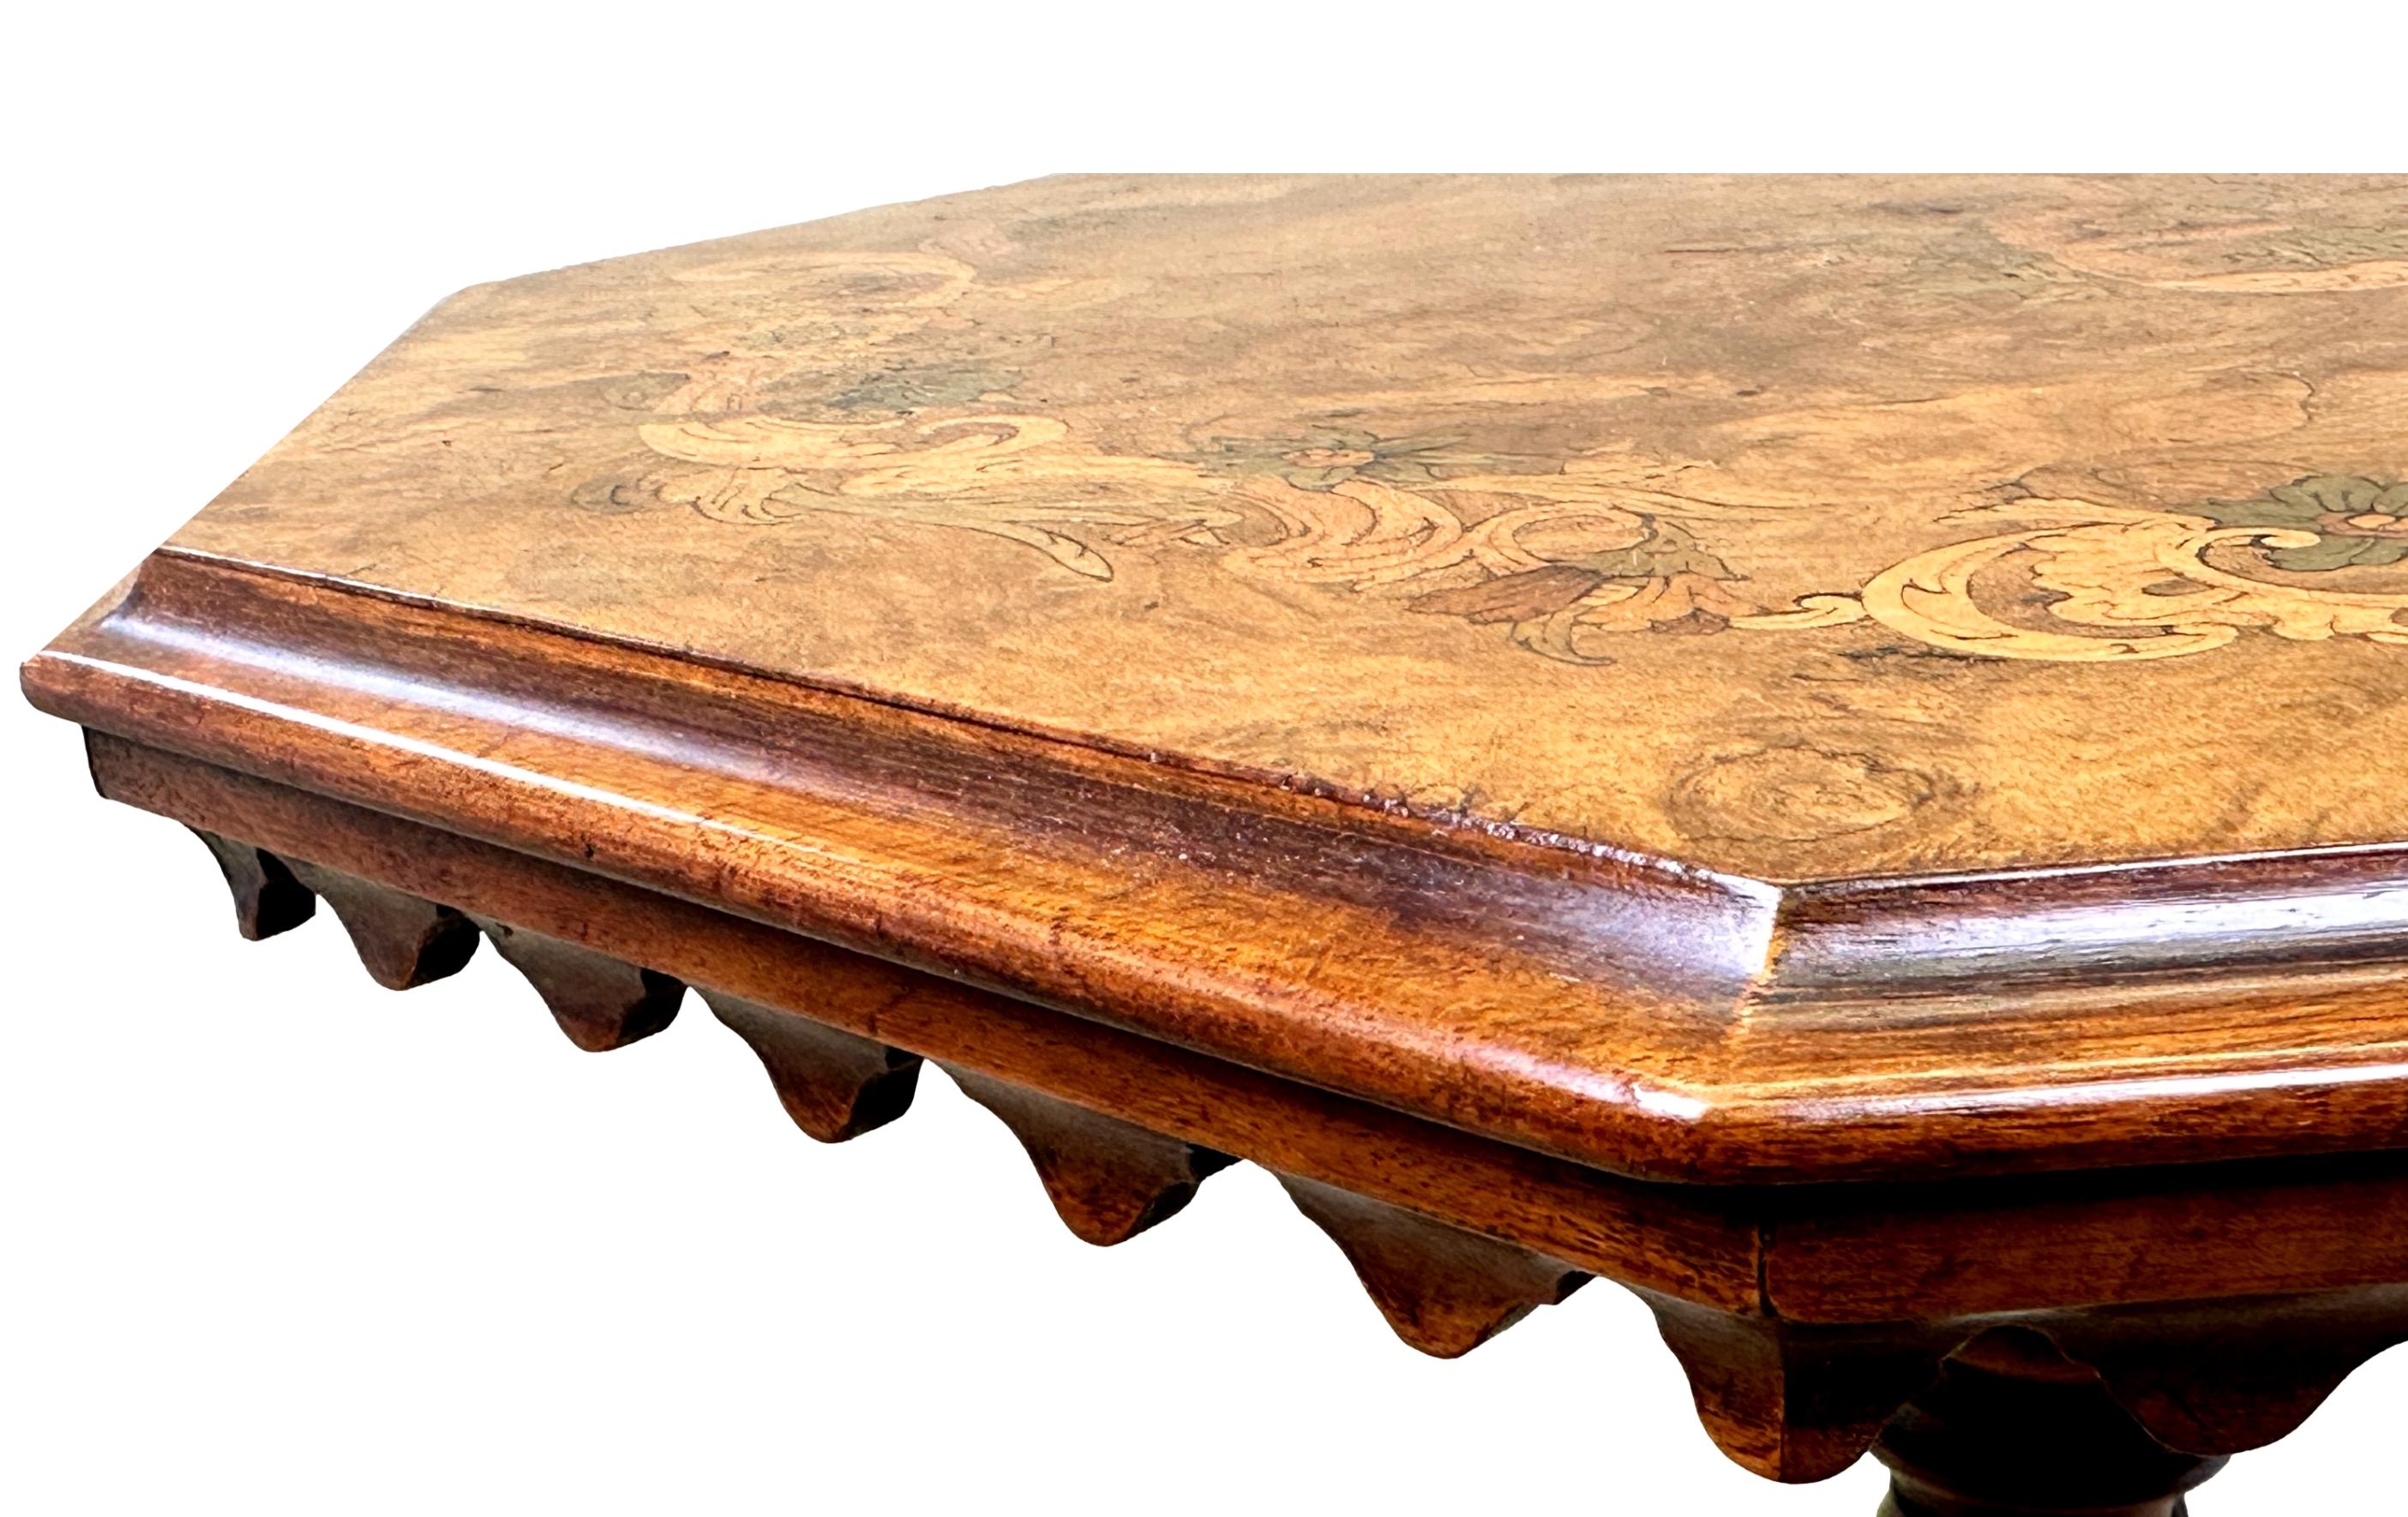 A Very Good Quality Mid 19th Century Victorian Burr Walnut Occasional Table, Having Superbly Figured Octagonal Top, With Profuse Marquetry Inlaid Decoration And Elegant Shaped Frieze, Raised Twisted, Turned Cenral Column Terminating On Moulded